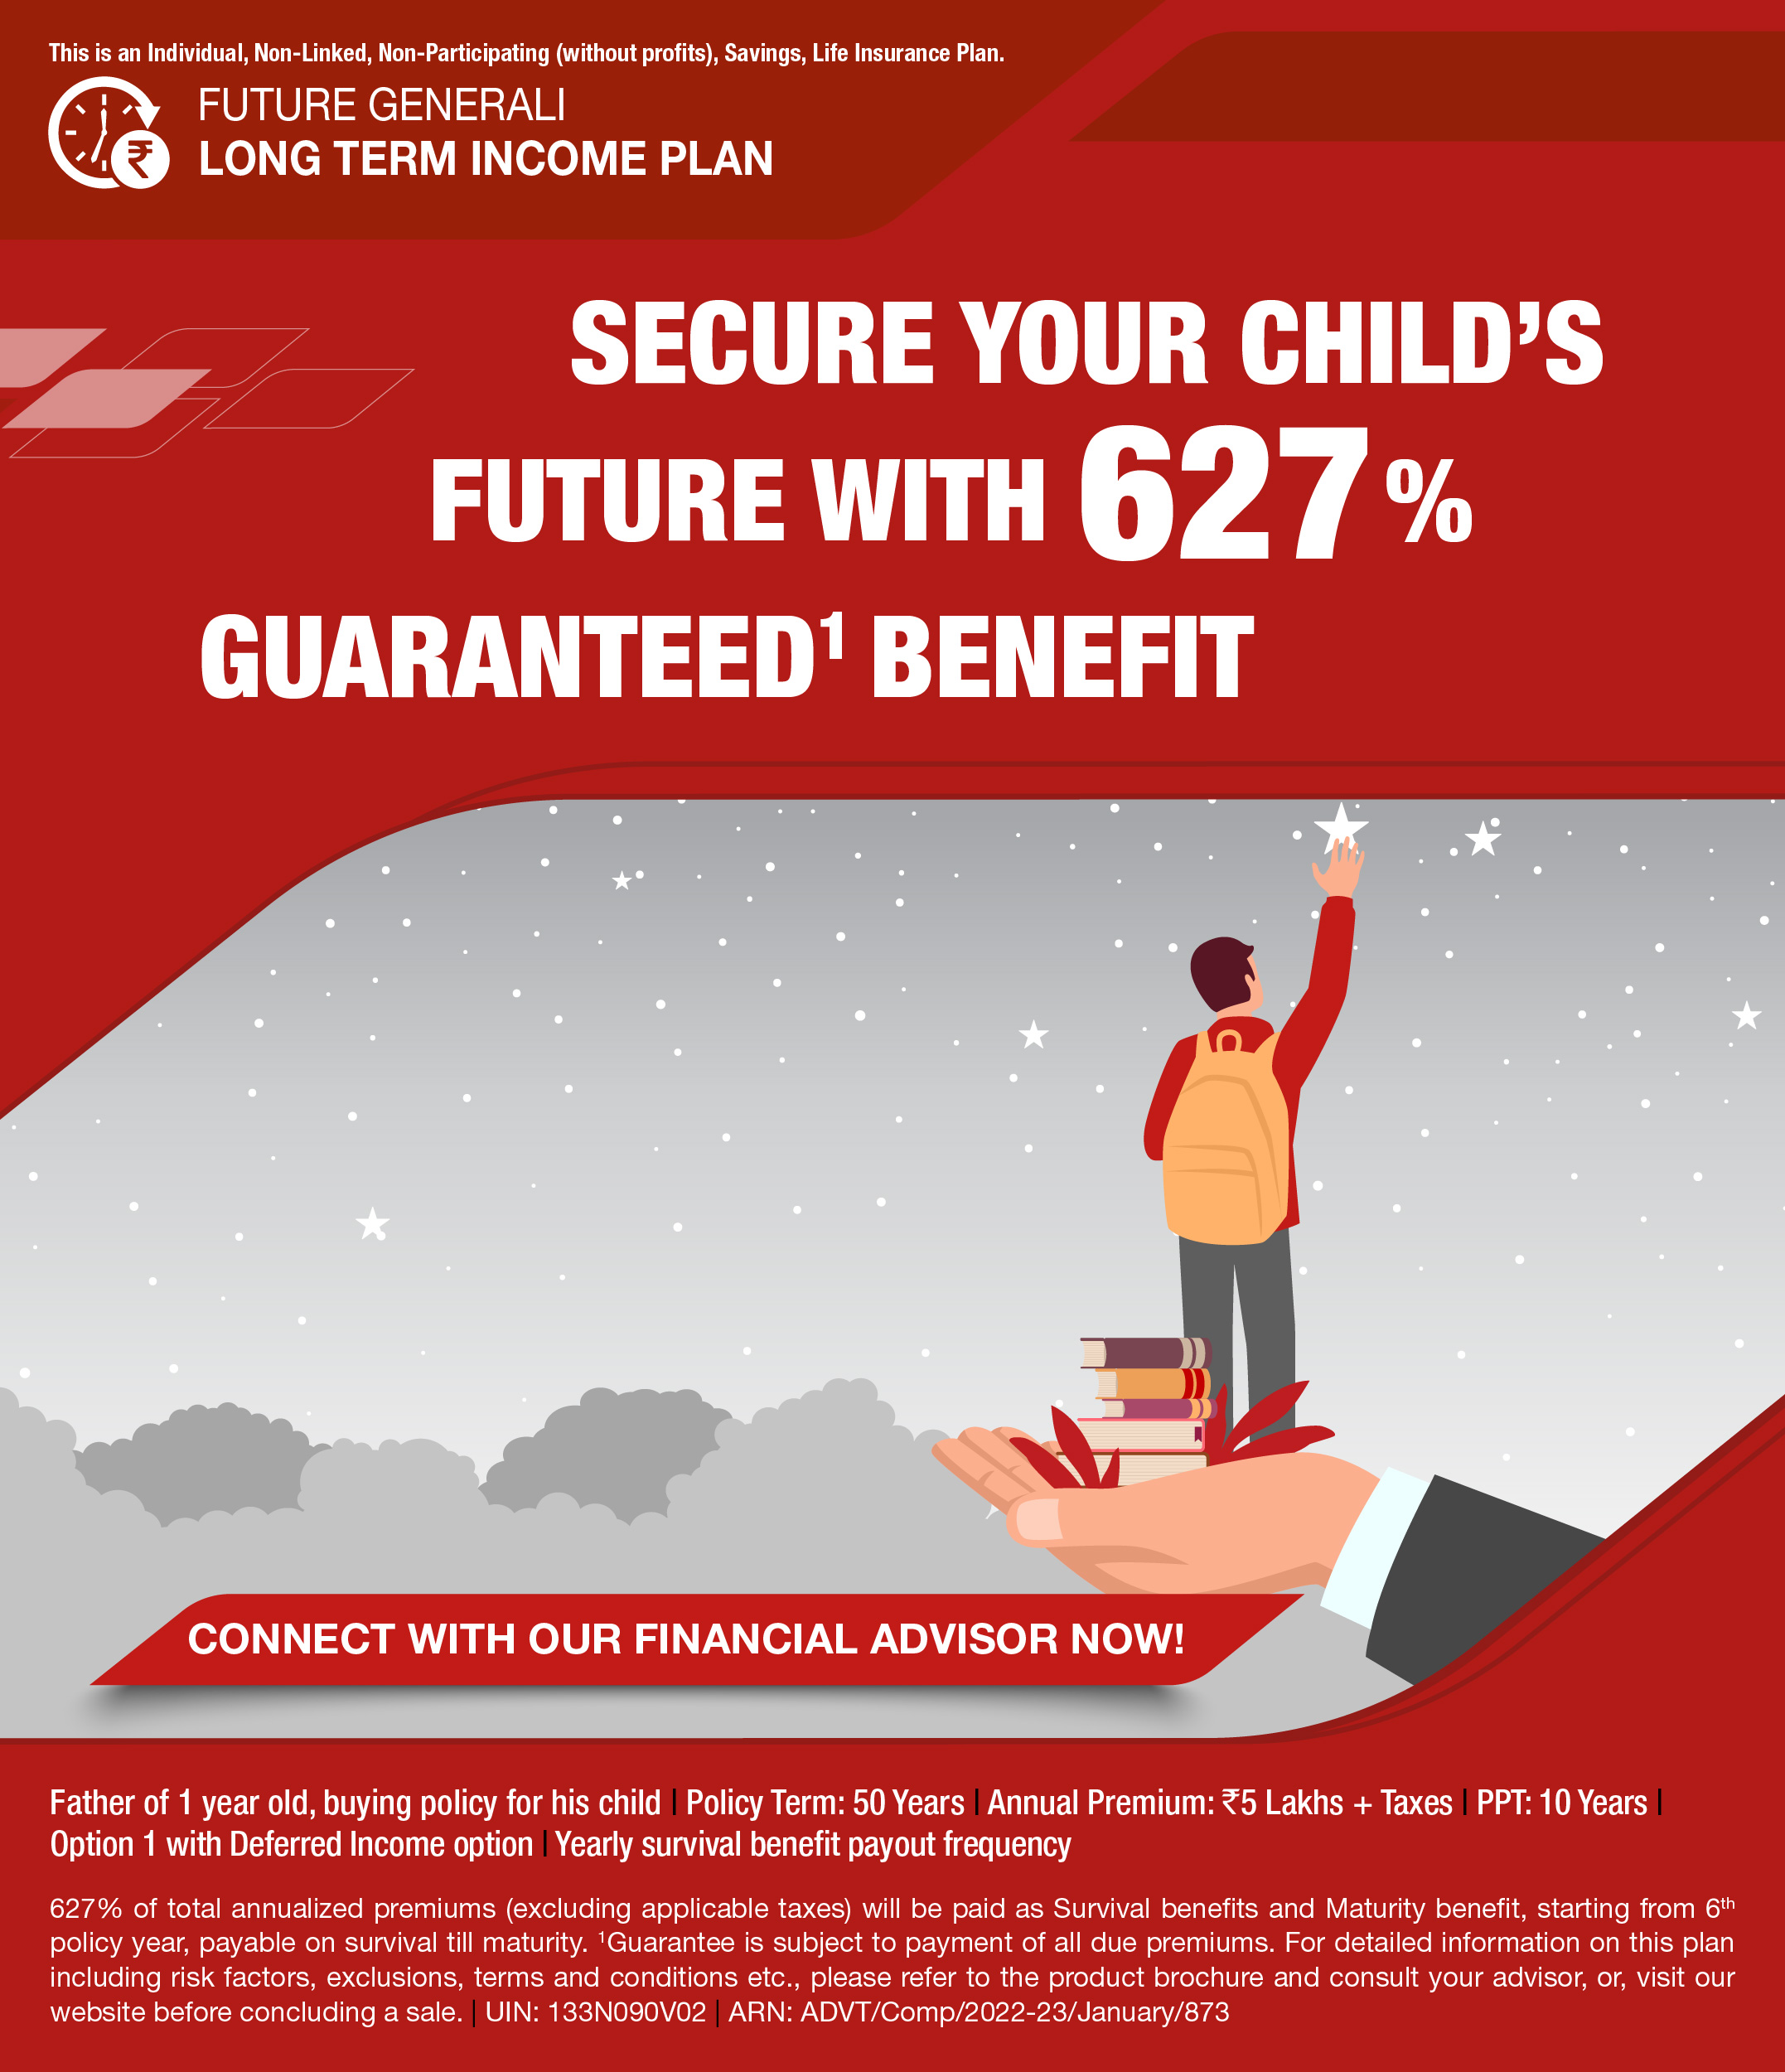 Secure your child's future with 627% Guaranteed Benefit